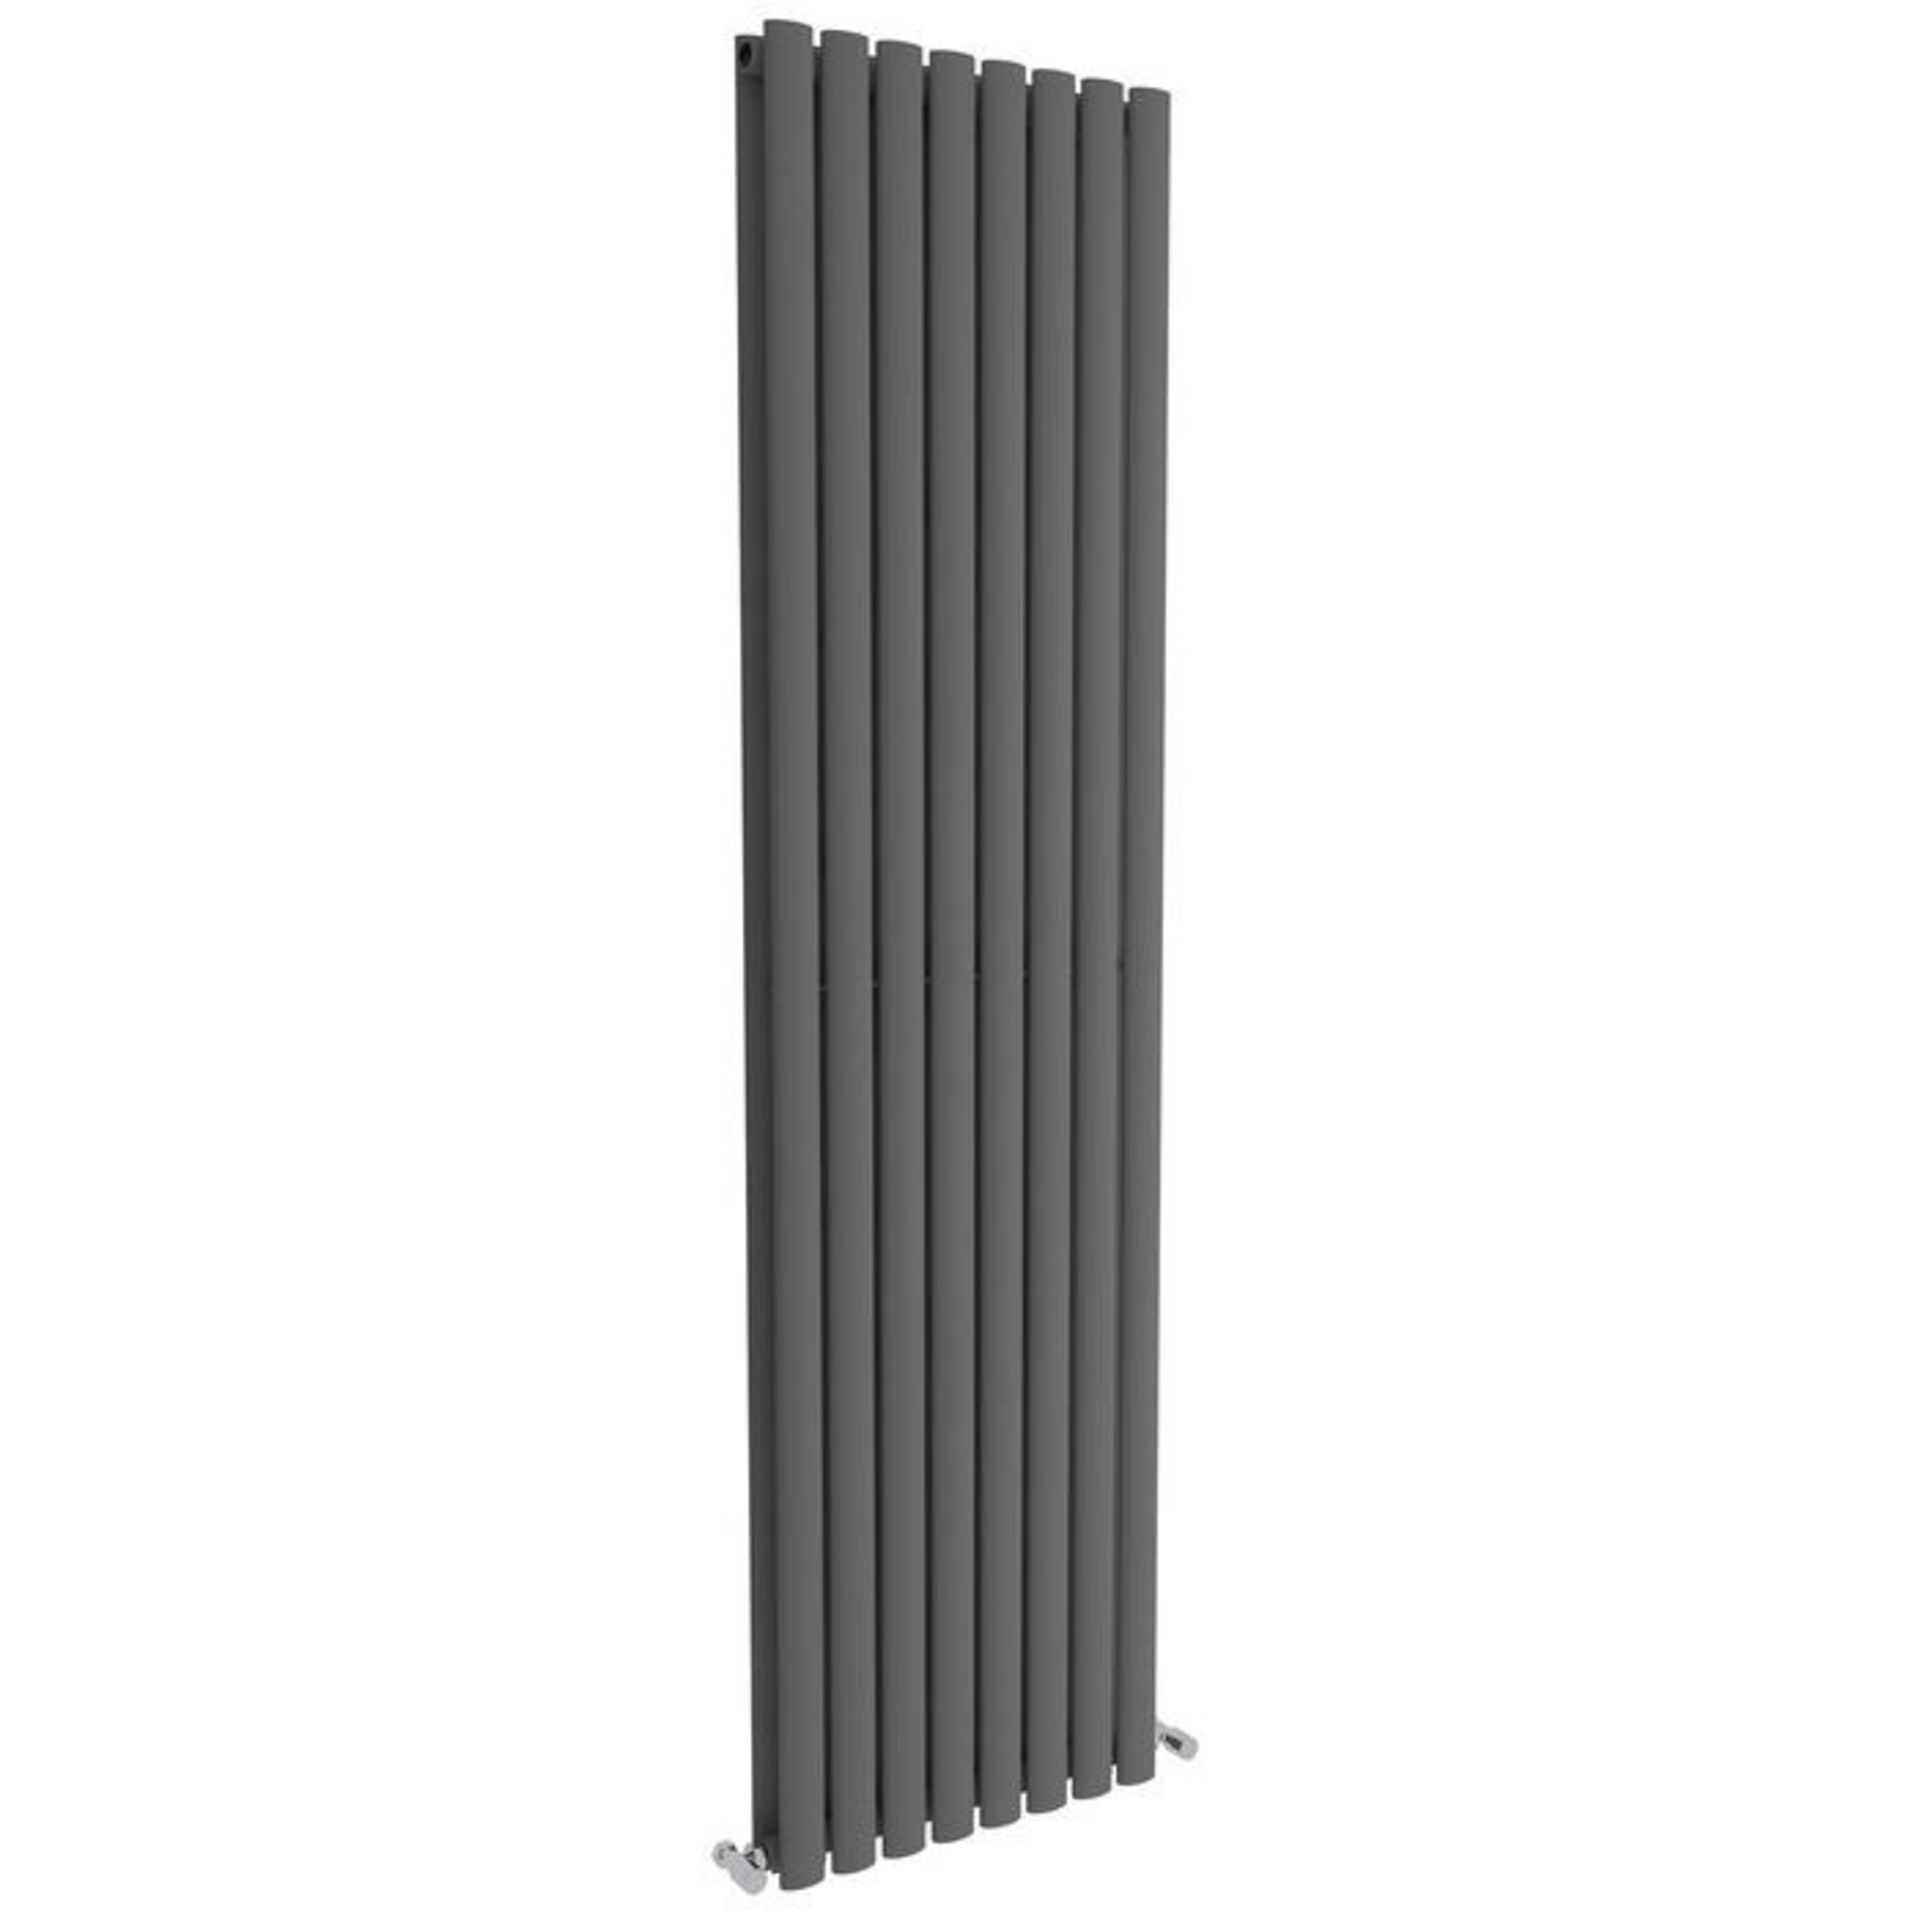 NEW & BOXED 1800x360mm Anthracite Double Oval Tube Vertical Premium Radiator. RRP £449.99.Made... - Image 3 of 3